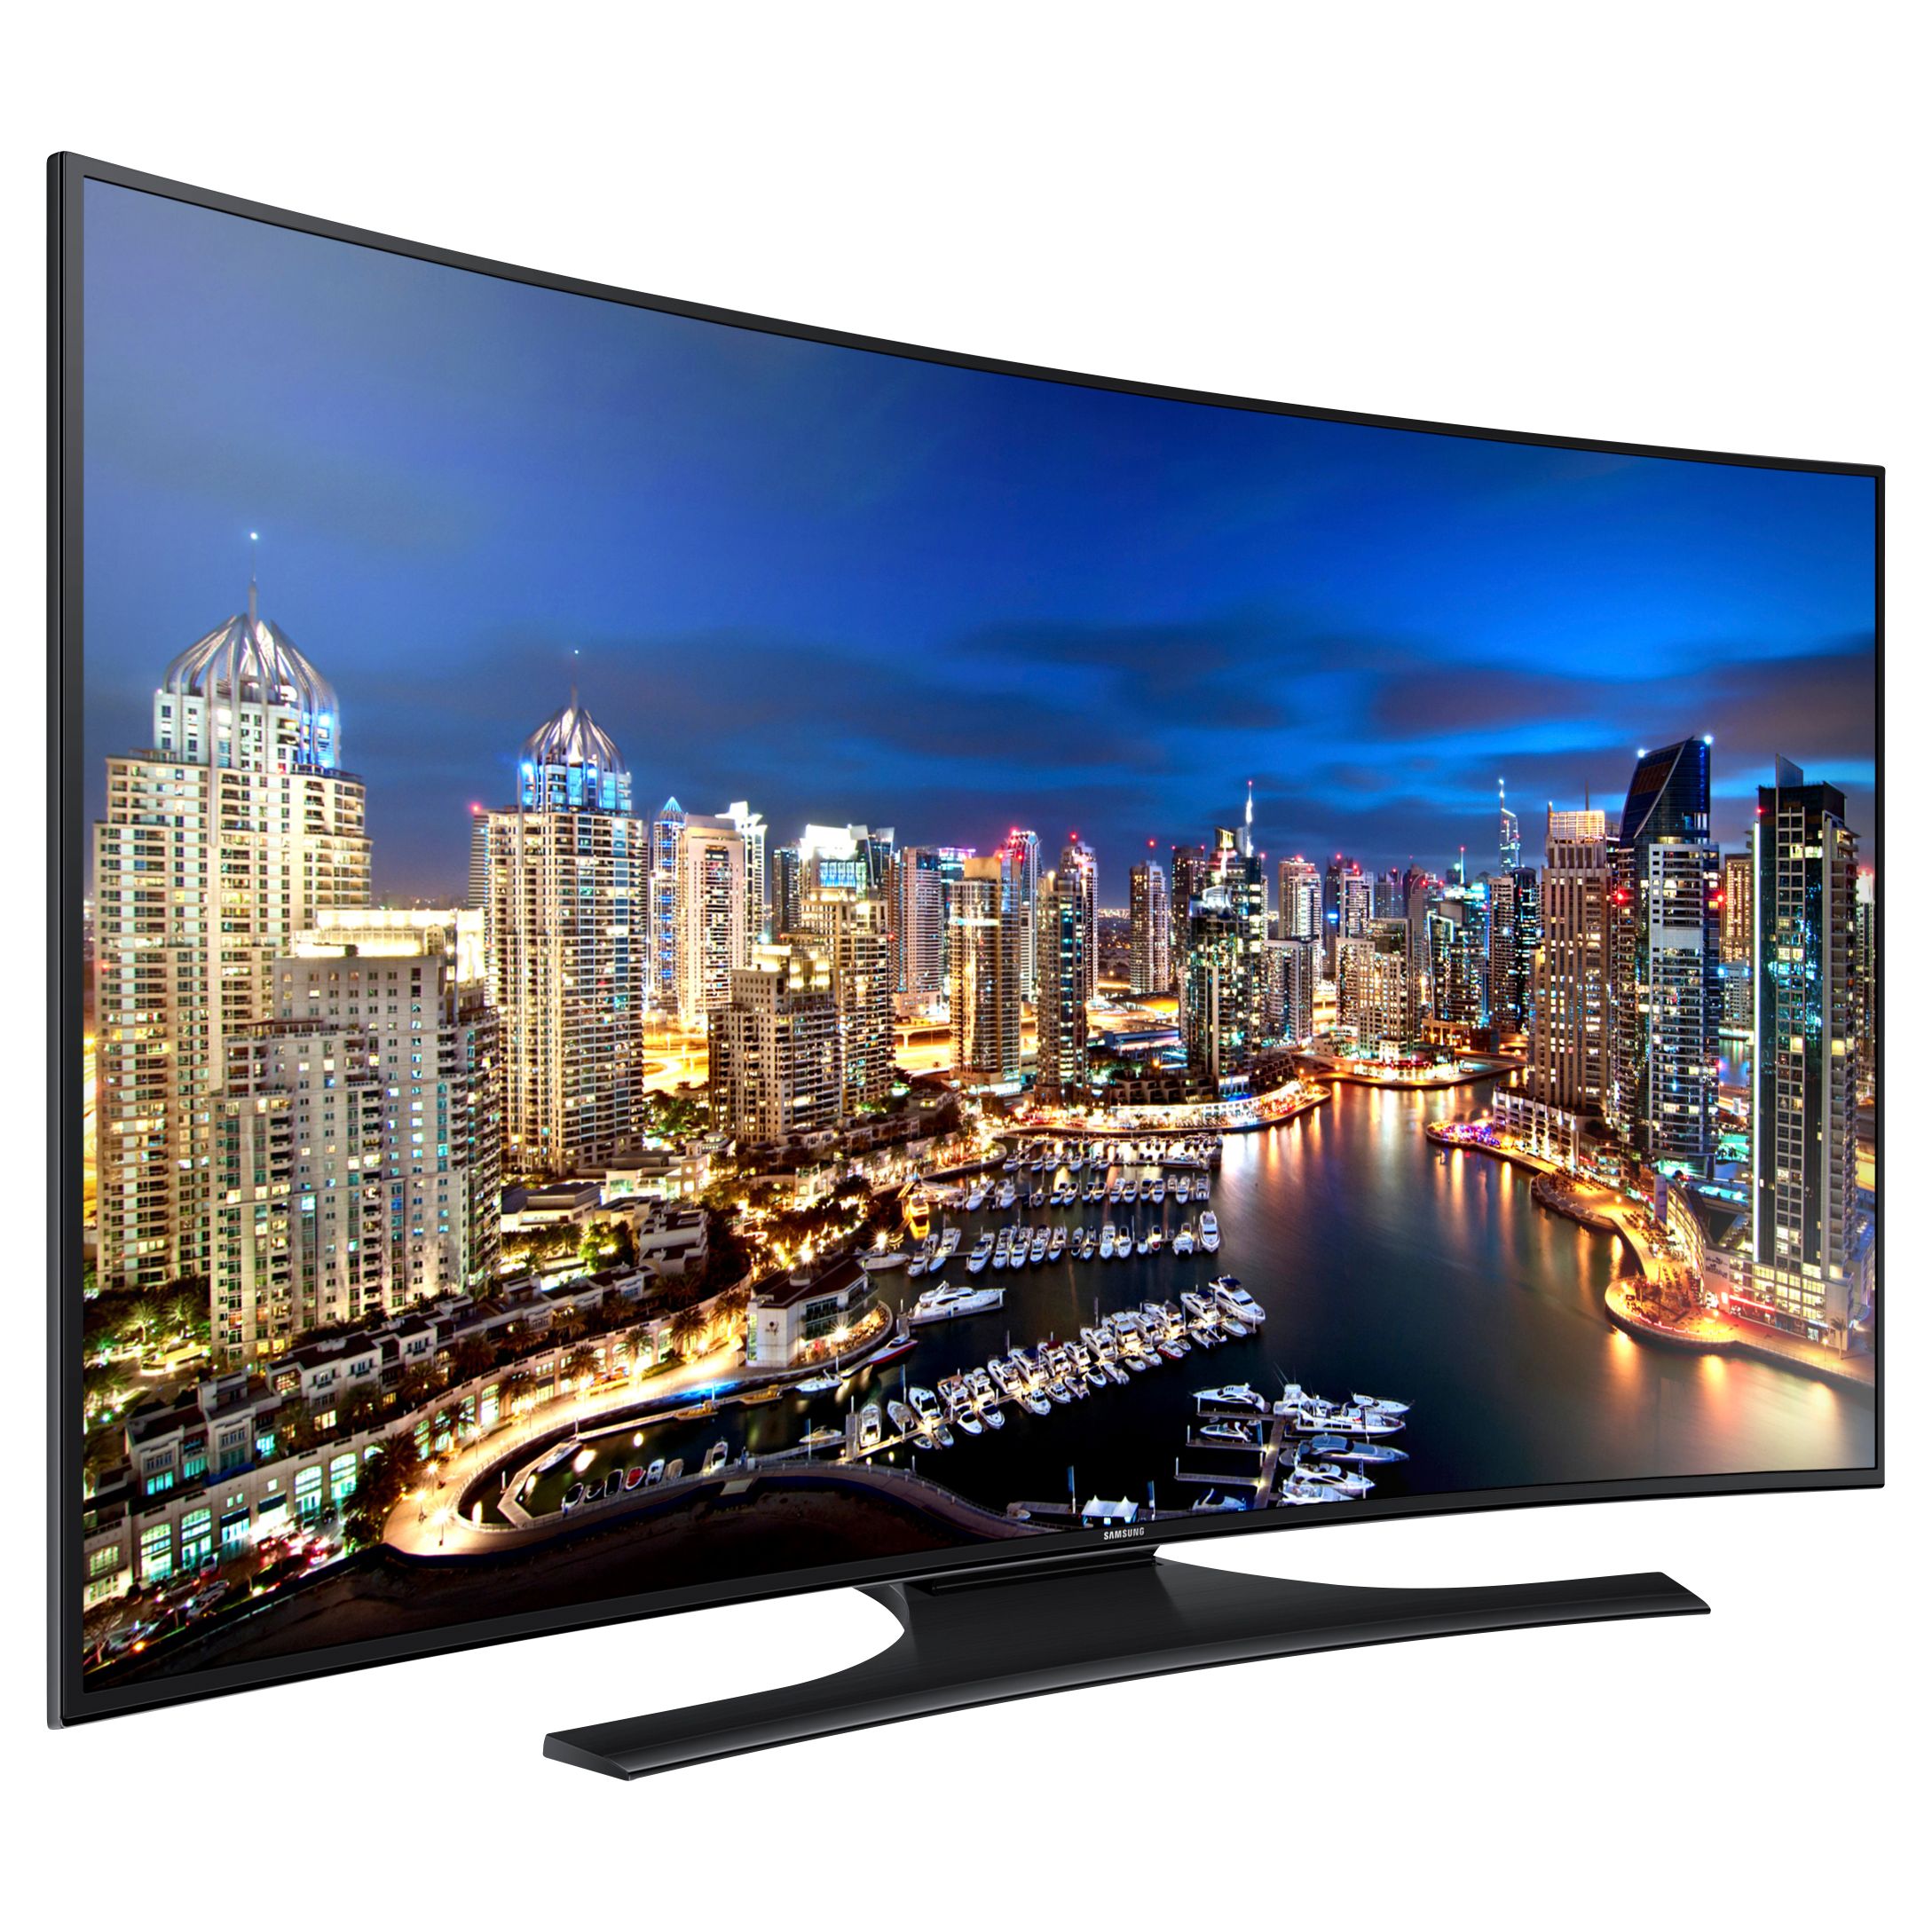 Samsung Ue55hu7200 Curved 4k Ultra Hd Smart Tv 55 With Freeview